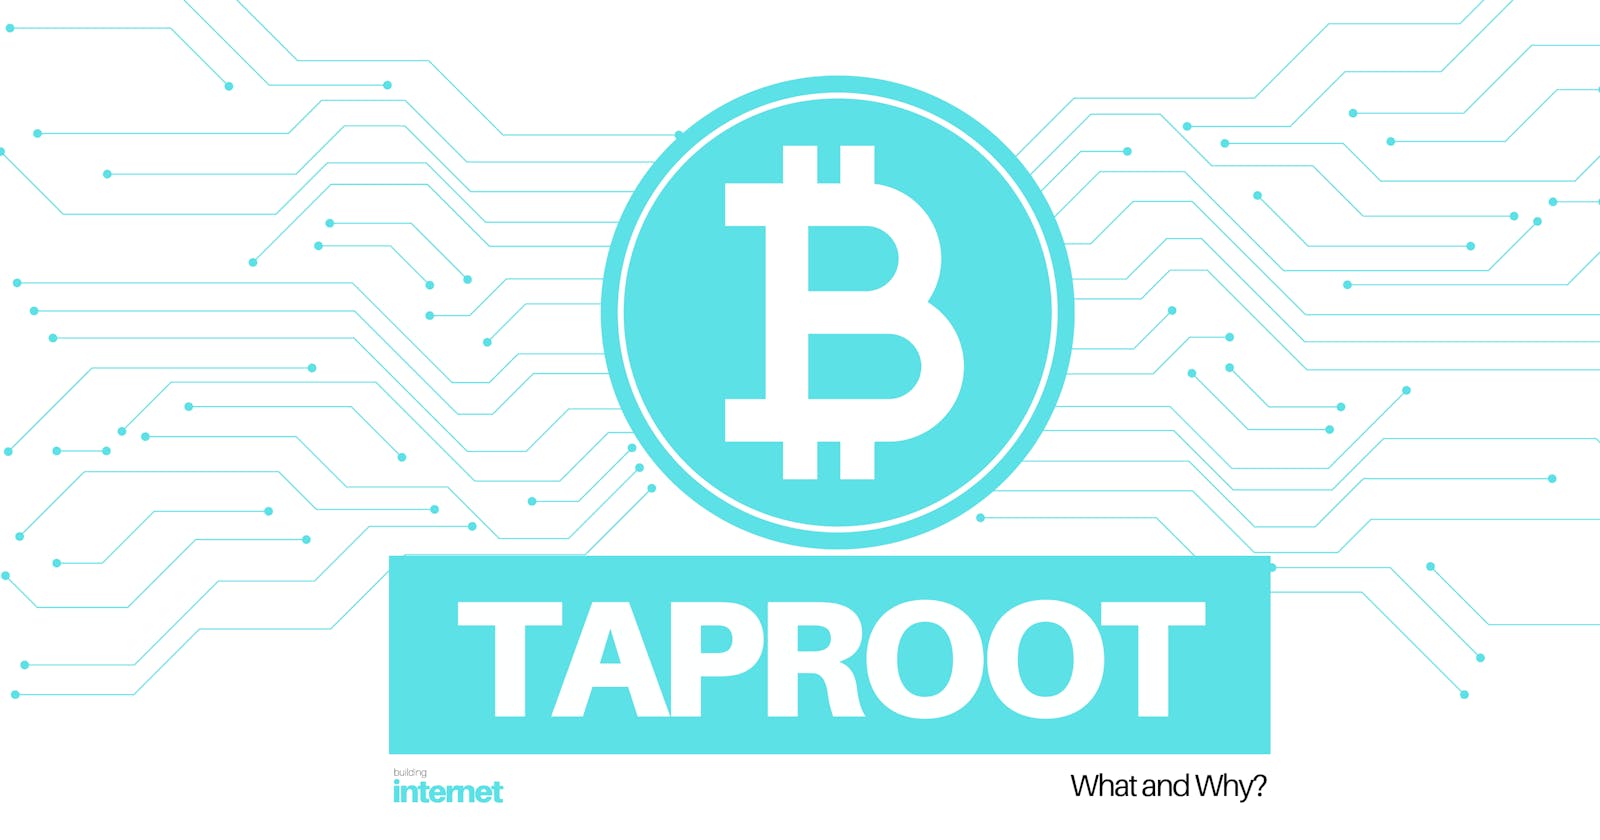 What Is Taproot? And What Do You Need to Know About It?